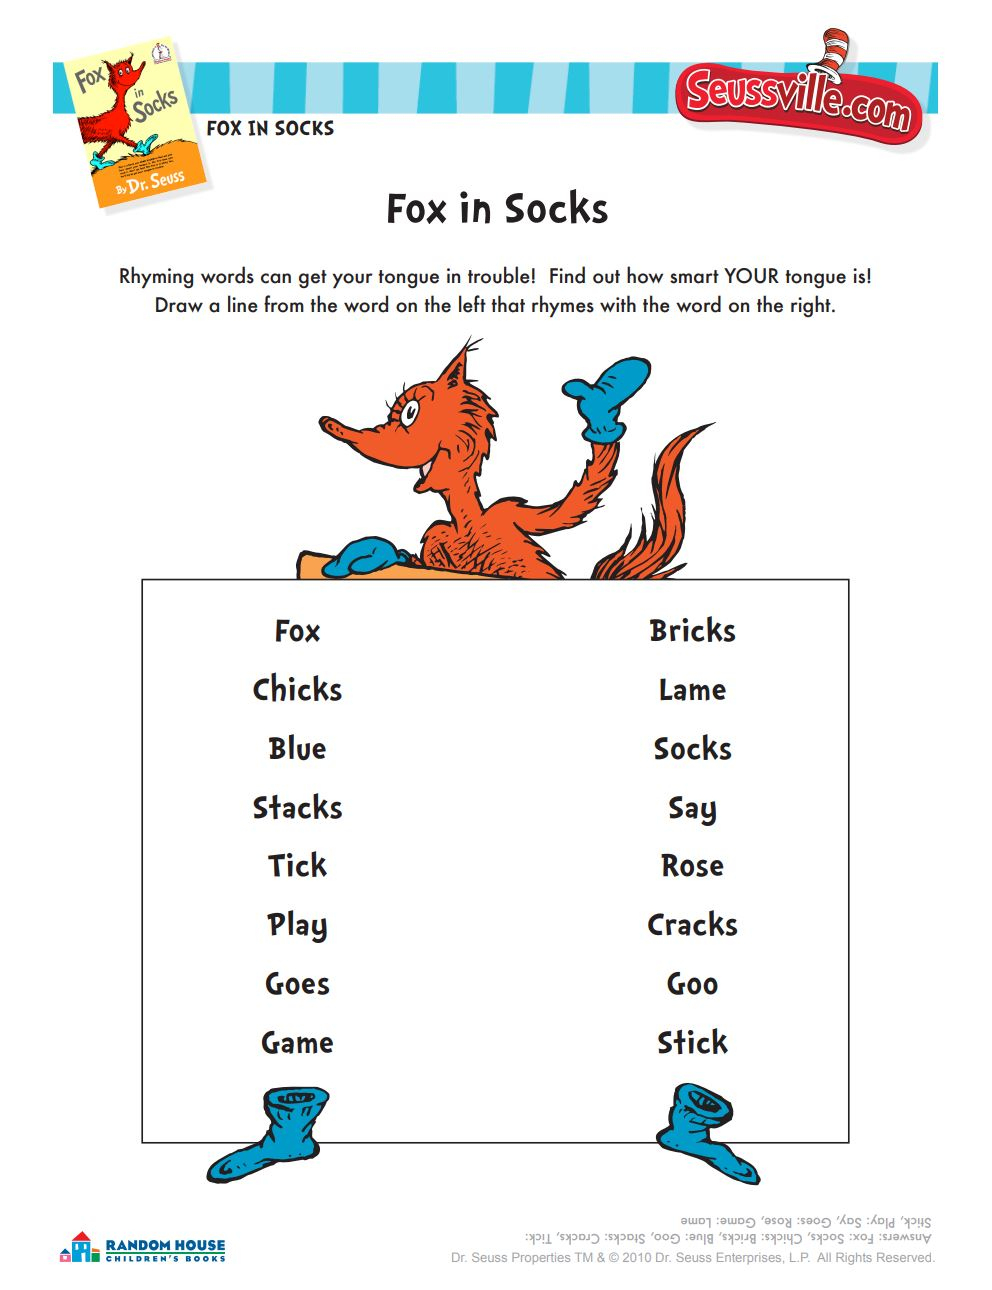 Dr. Seuss Printables And Activities | Brightly - Free Dr Seuss Rhyming Printables